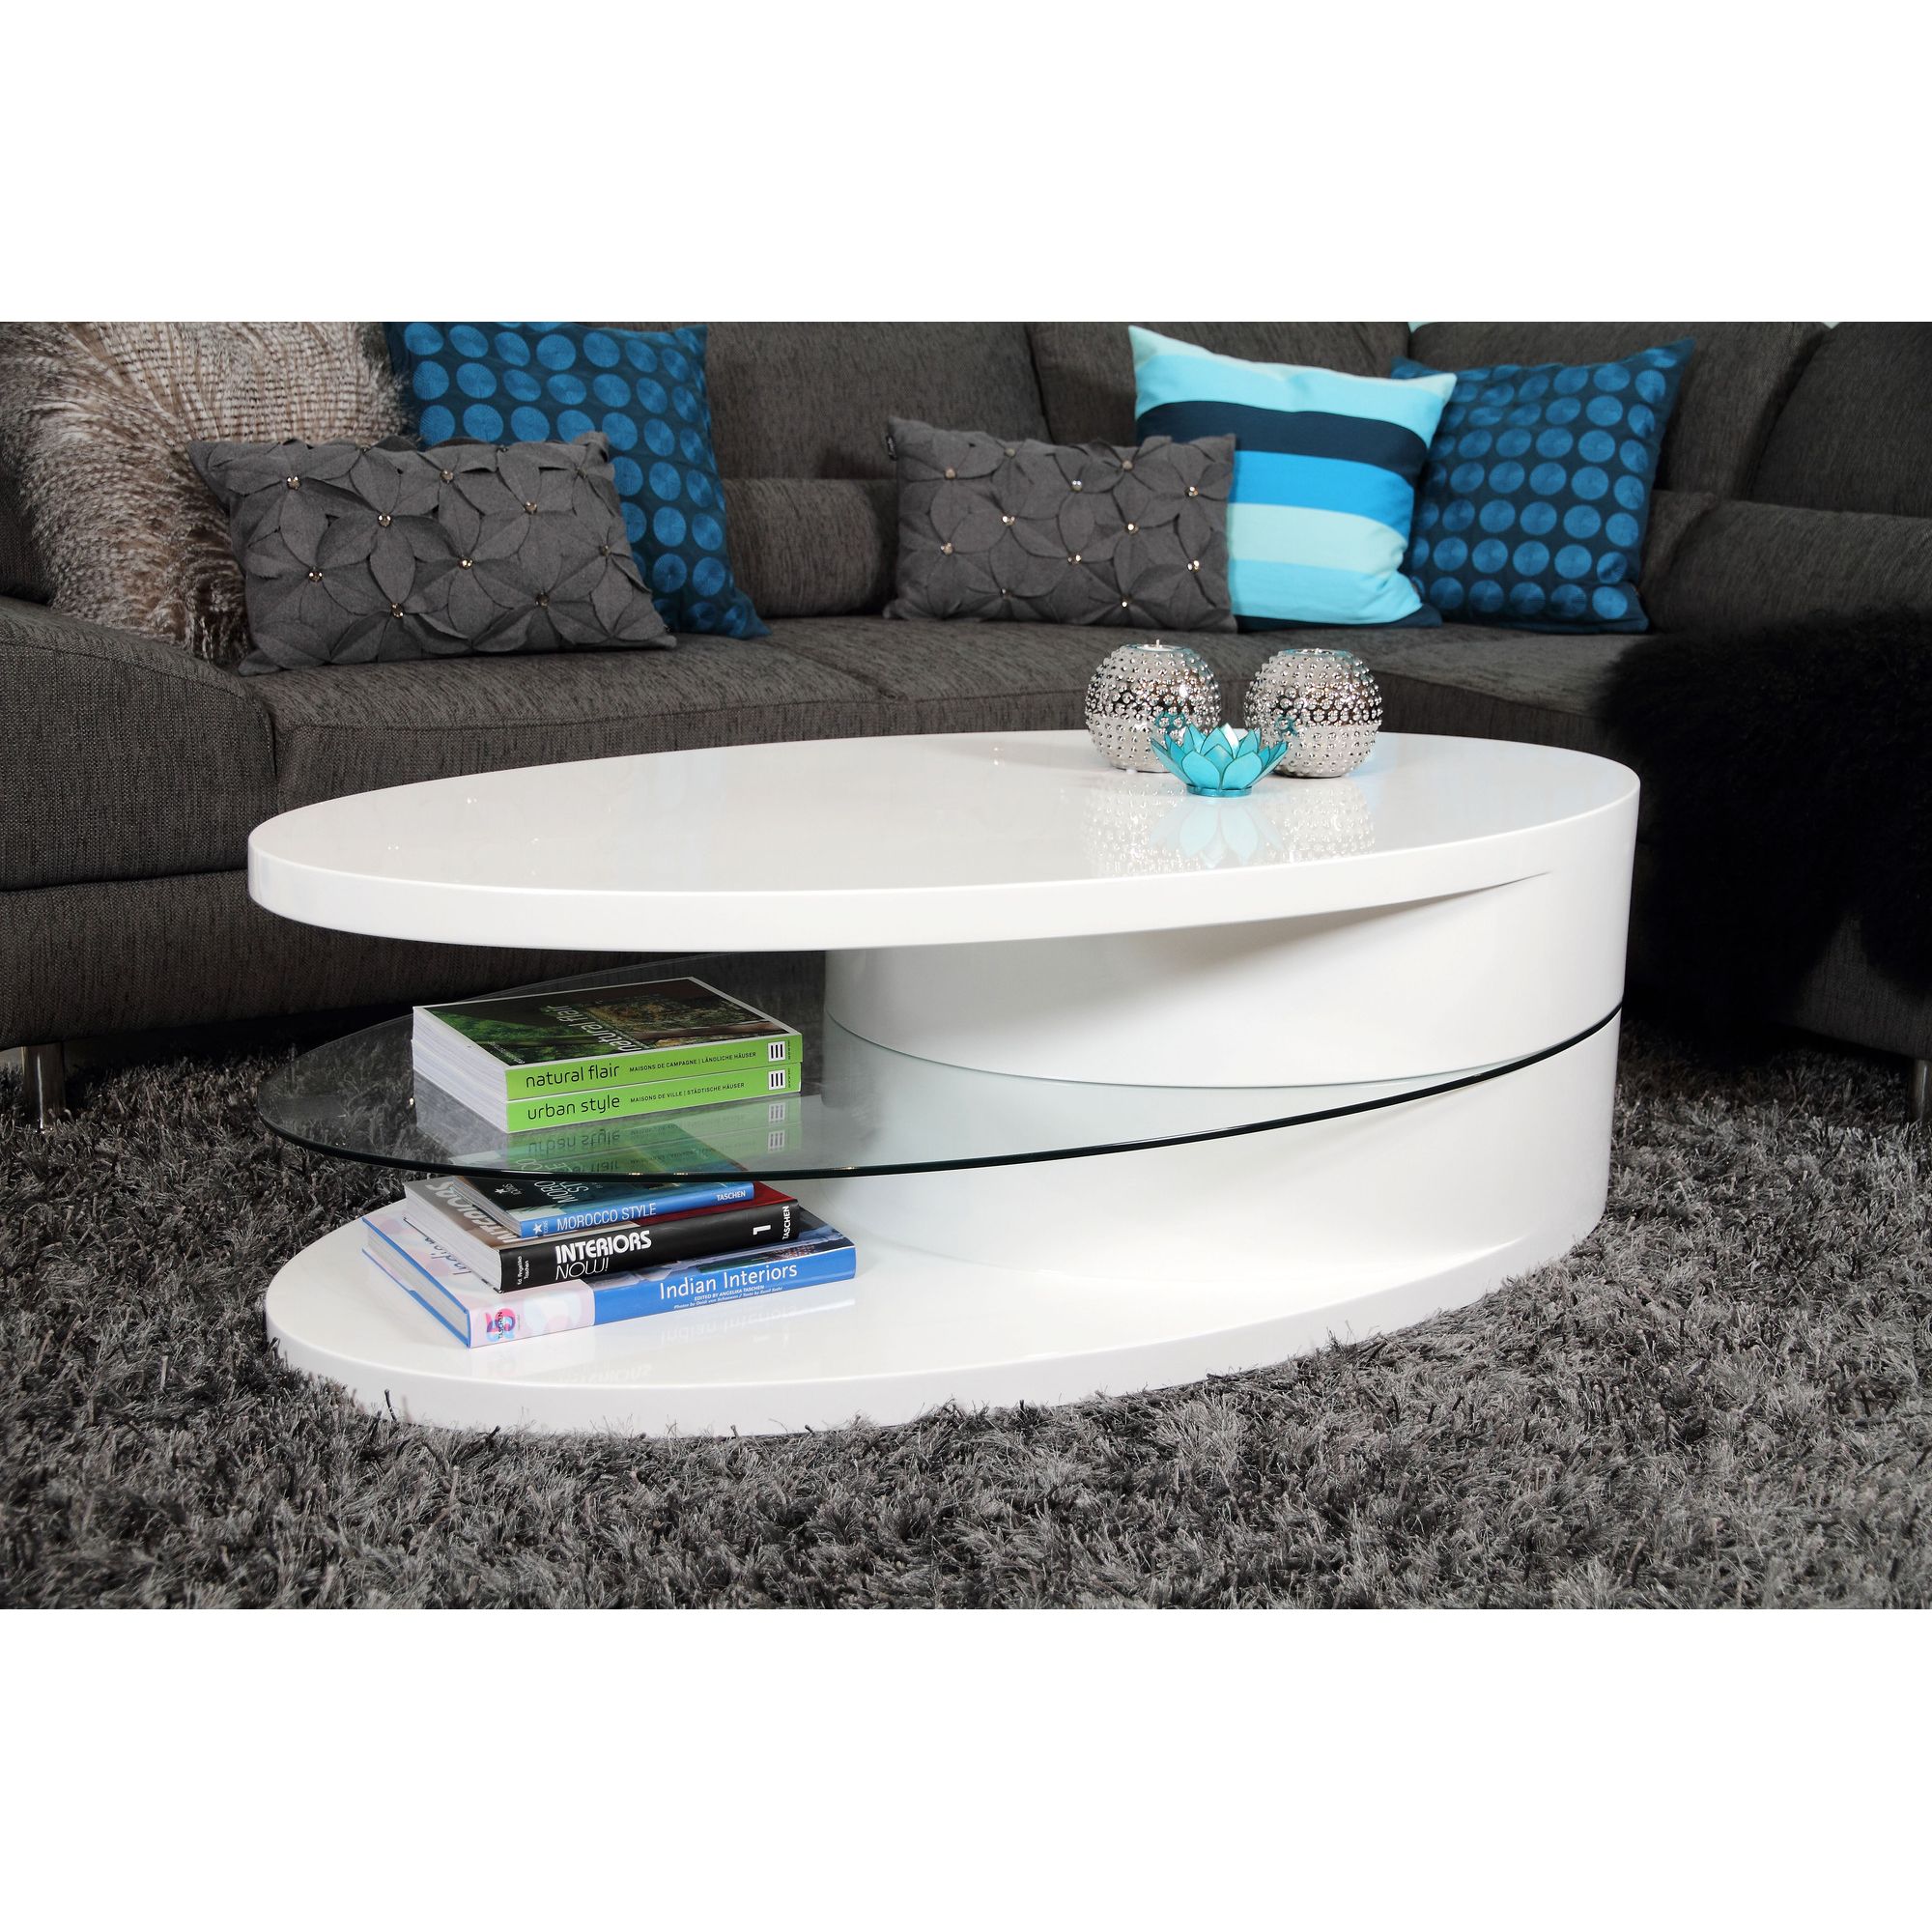 Aspect Design Shove Coffee Table in High Gloss White at Tesco Direct